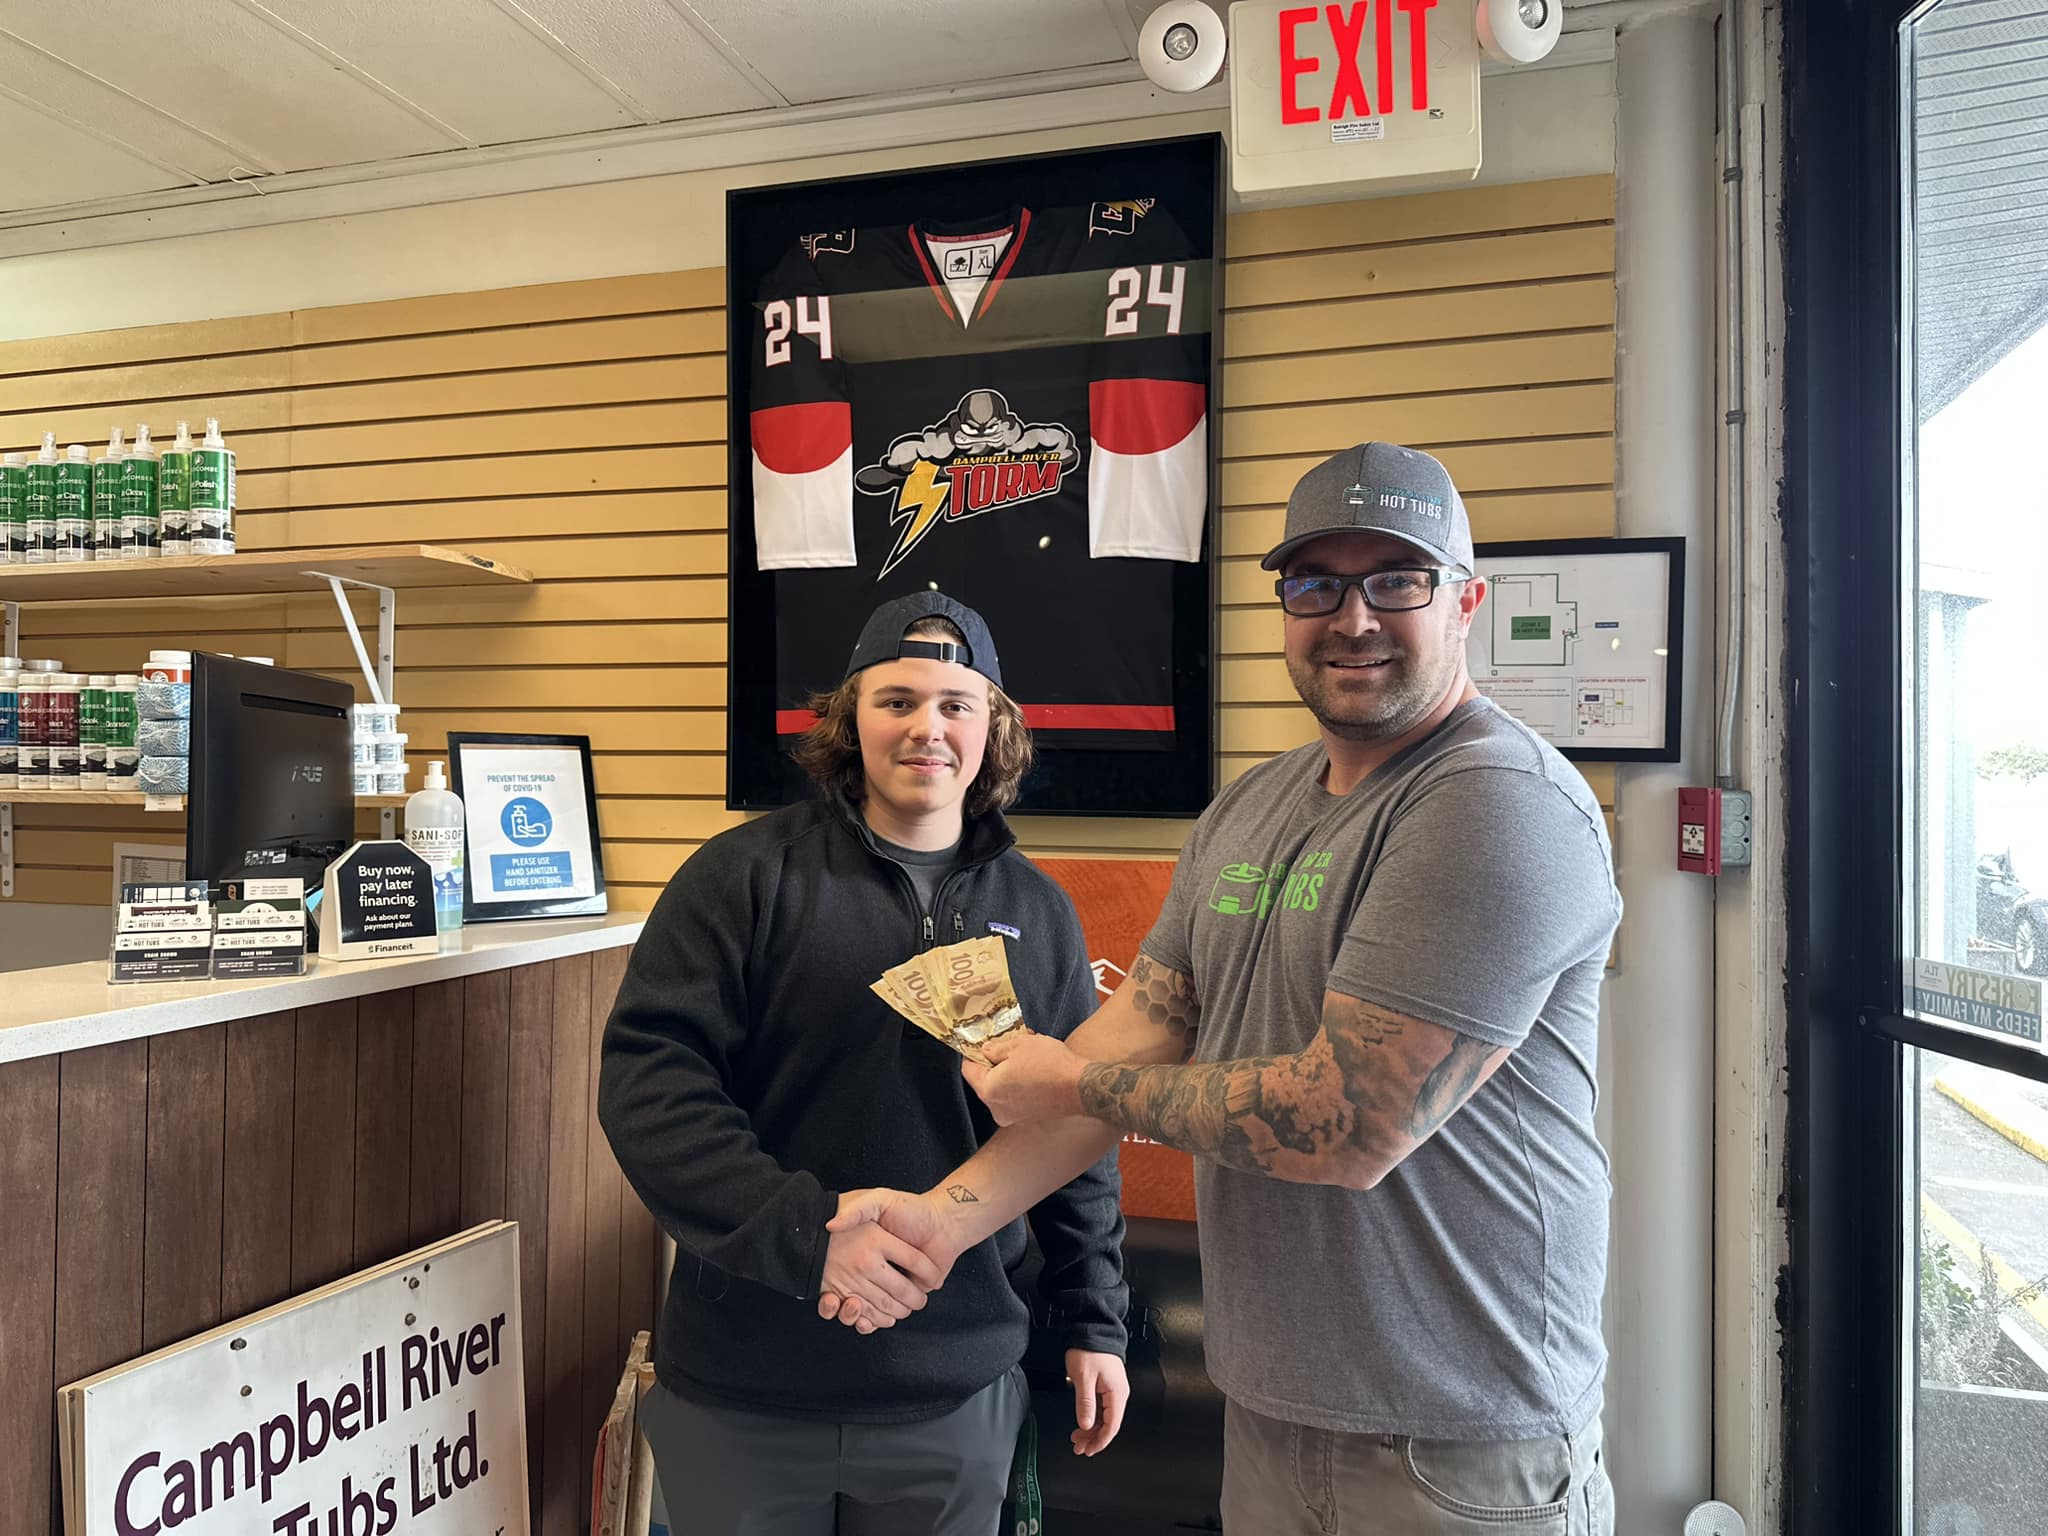 Congrats to #35 Nick Peters of the Campbell River Storm as this year’s recipient of the Campbell River Hot Tubs Ltd. Community support player earning and $1000 and a spot on our wall of support players